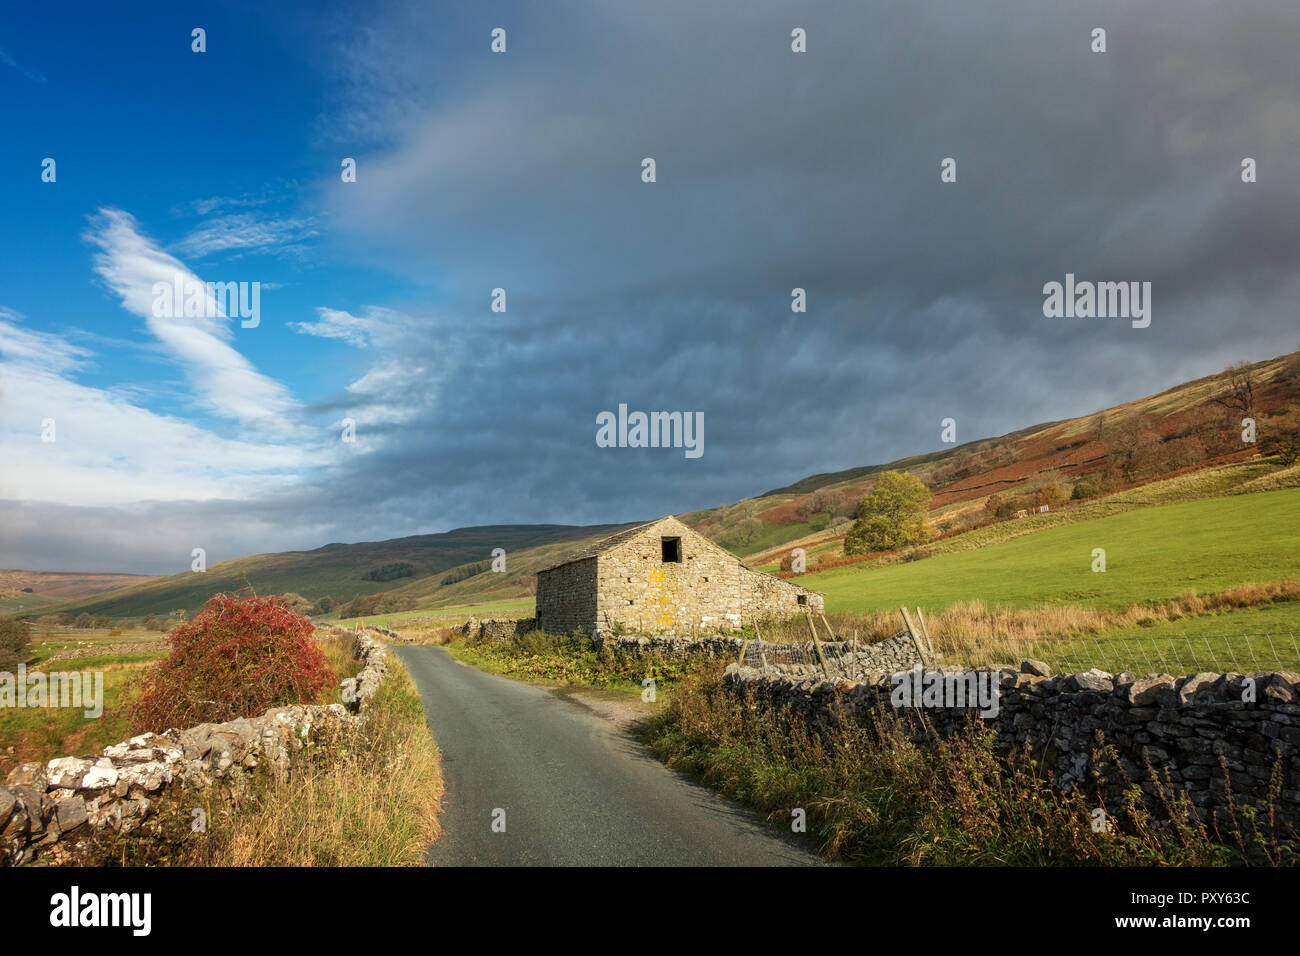 Yorkshire stone barn in autumn with a tree ladened with red berries, Littondale, Yorkshire Dales, UK Stock Photo